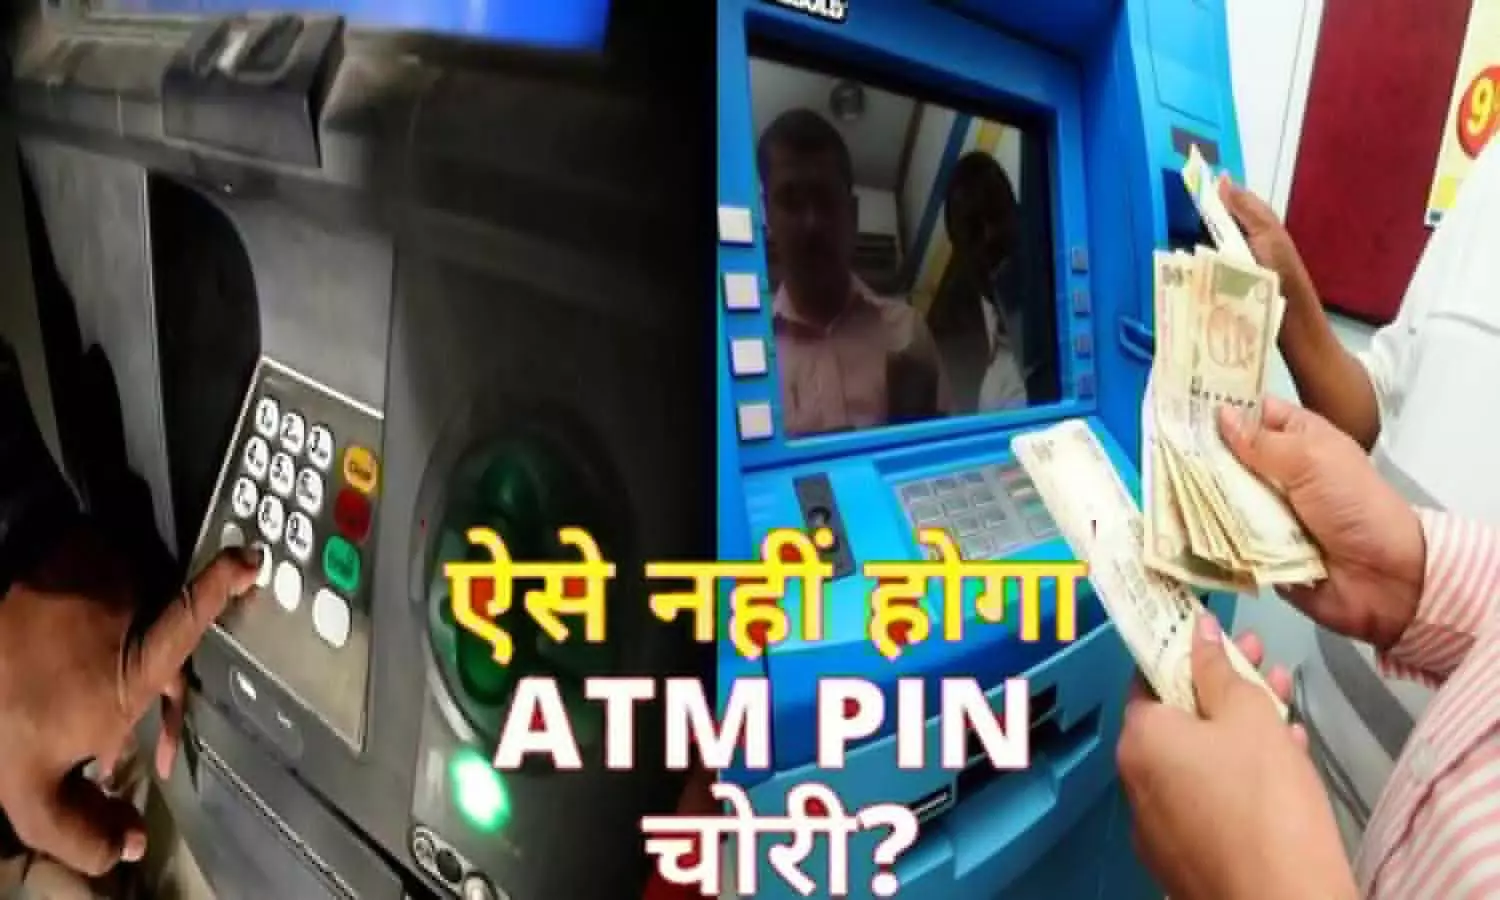 Can I press cancel button twice before withdrawing money to avoid PIN hacking in ATM?